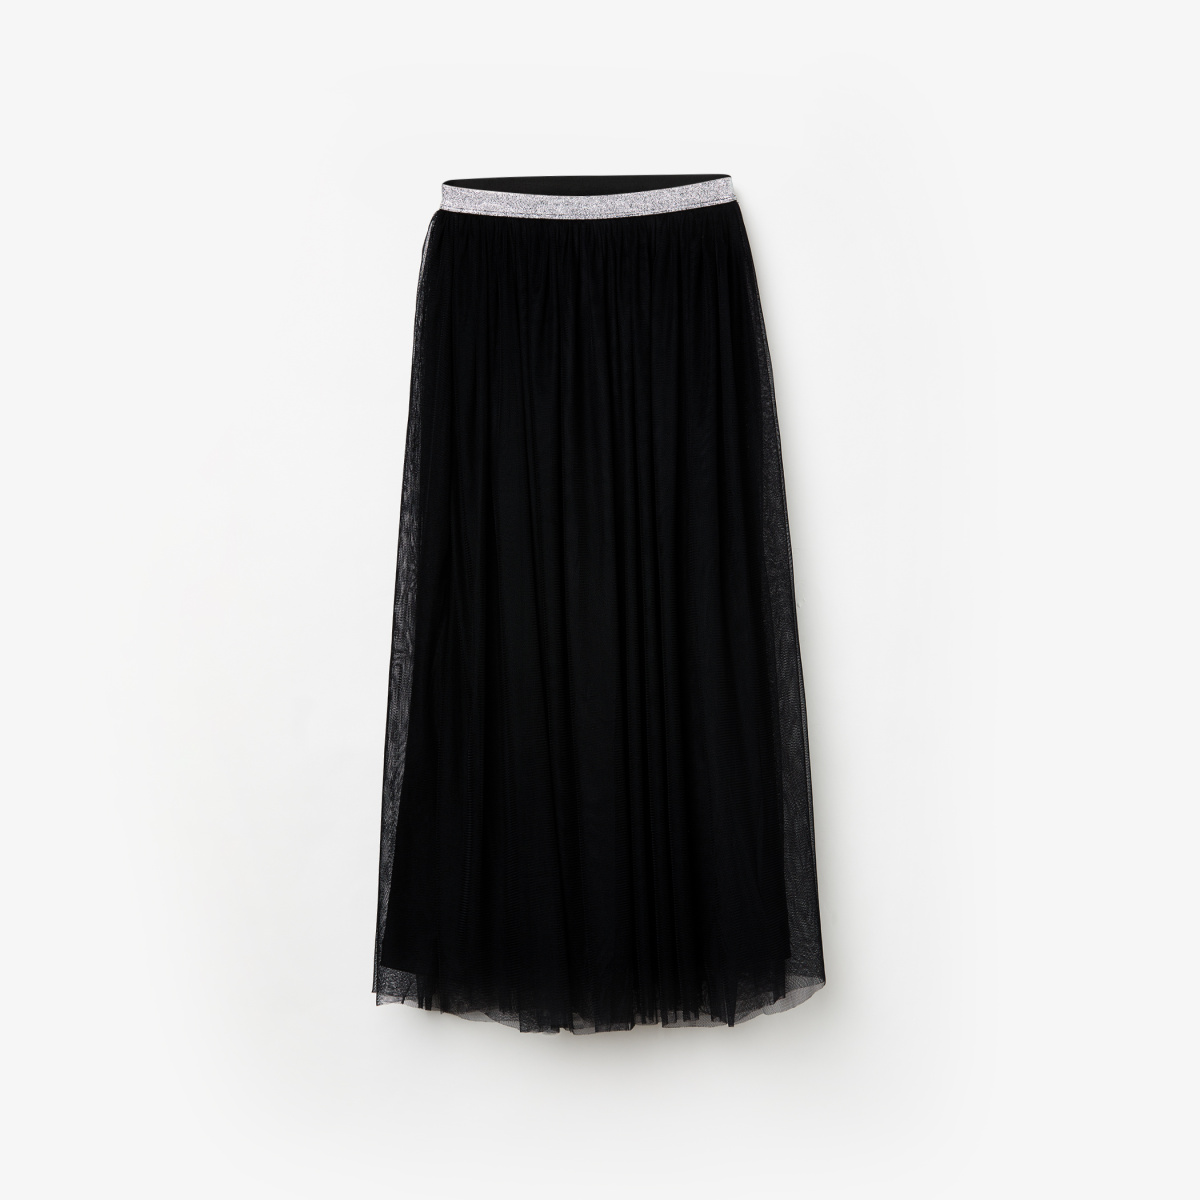 FAME FOREVER PRETTY ME Girls Solid A-Line Skirt